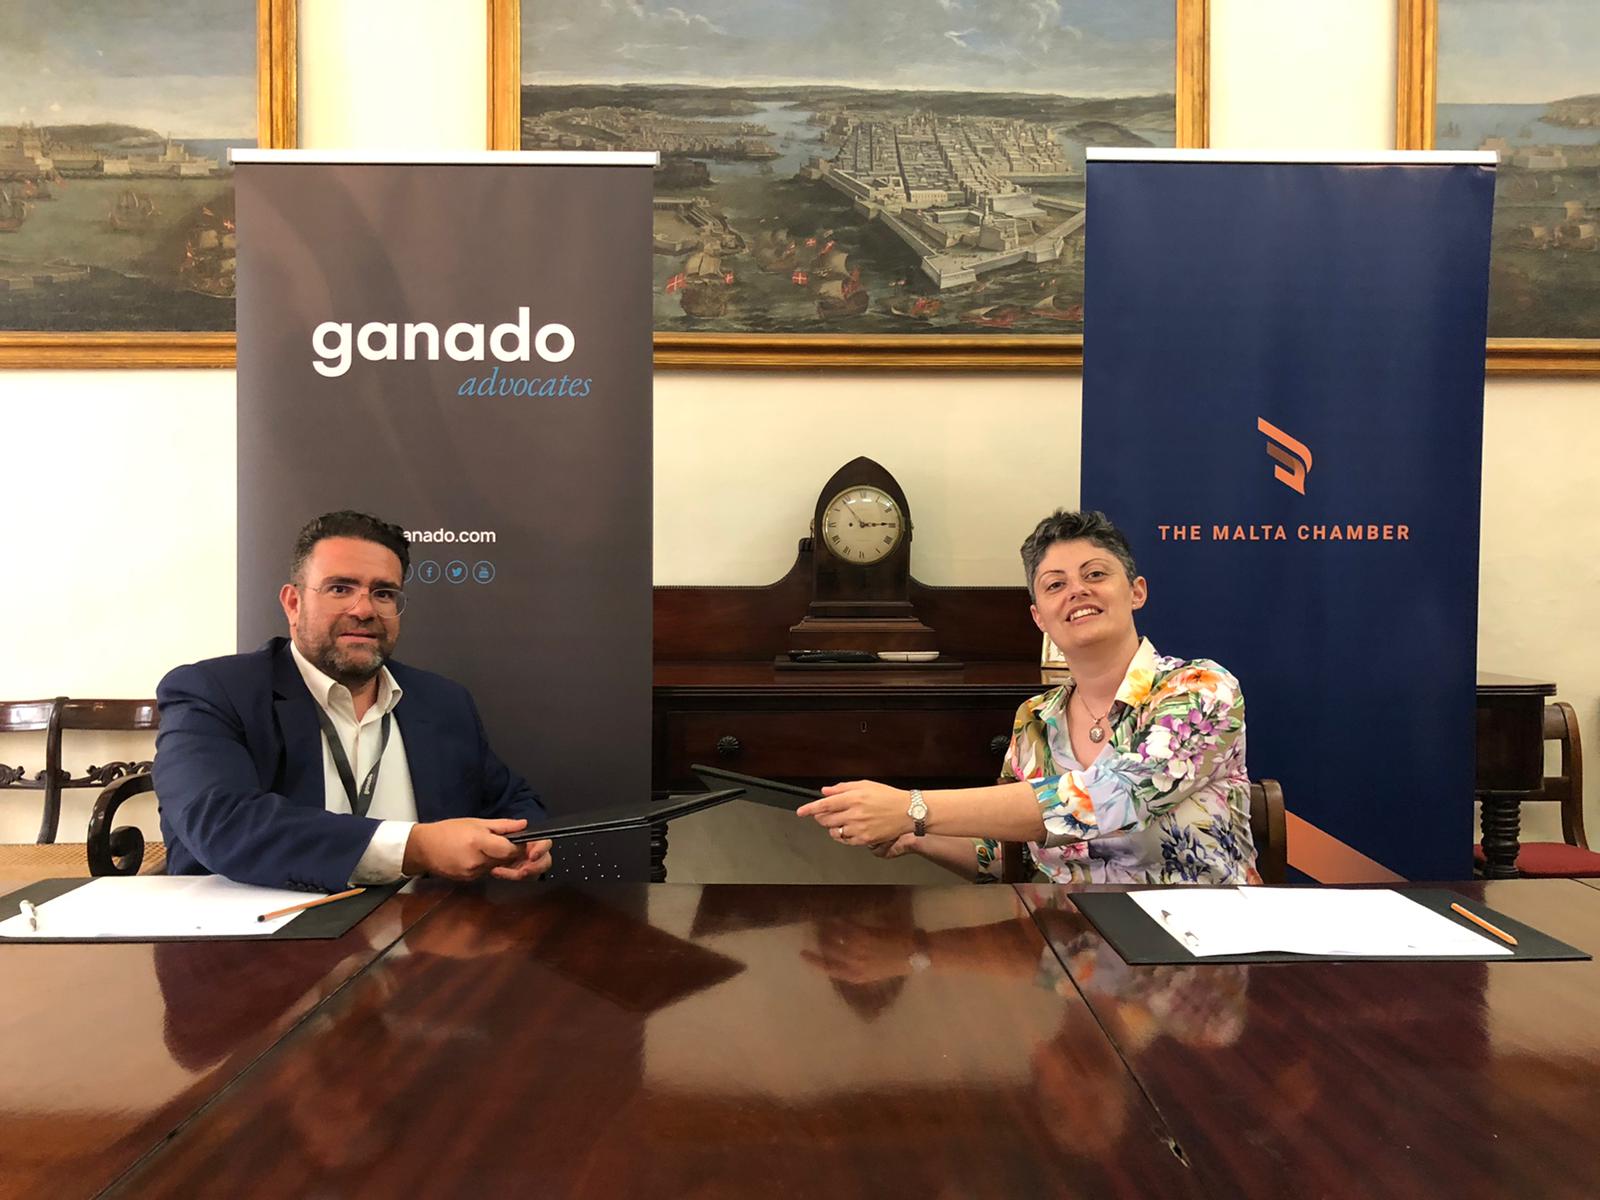 The Malta Chamber strengthens alliance with Ganado Advocates